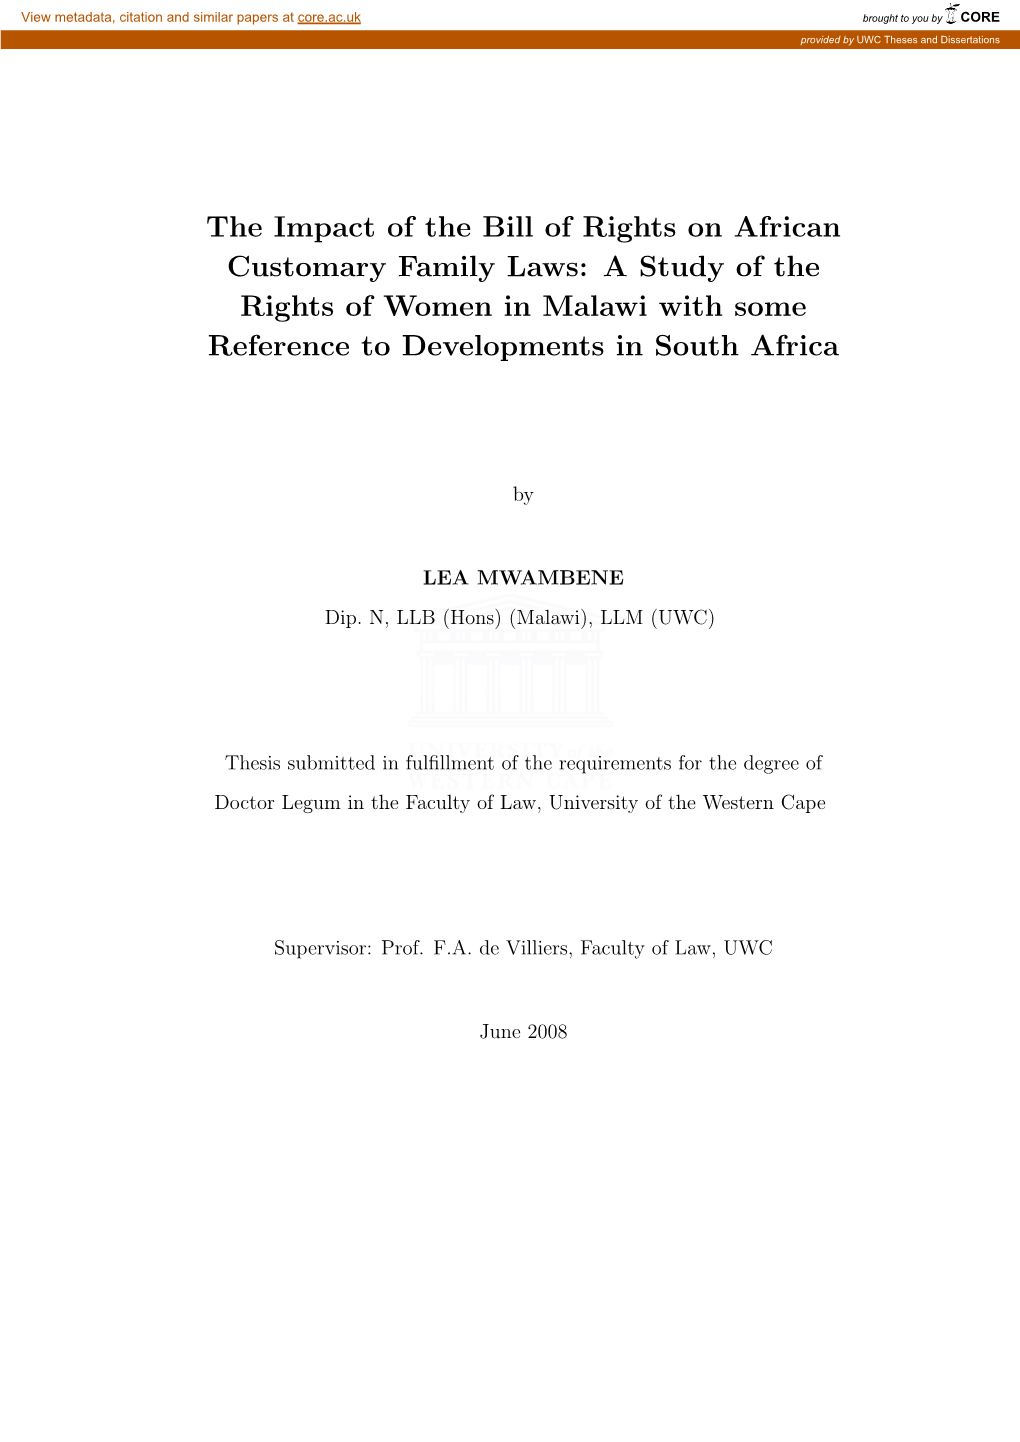 The Impact of the Bill of Rights on African Customary Family Laws: A